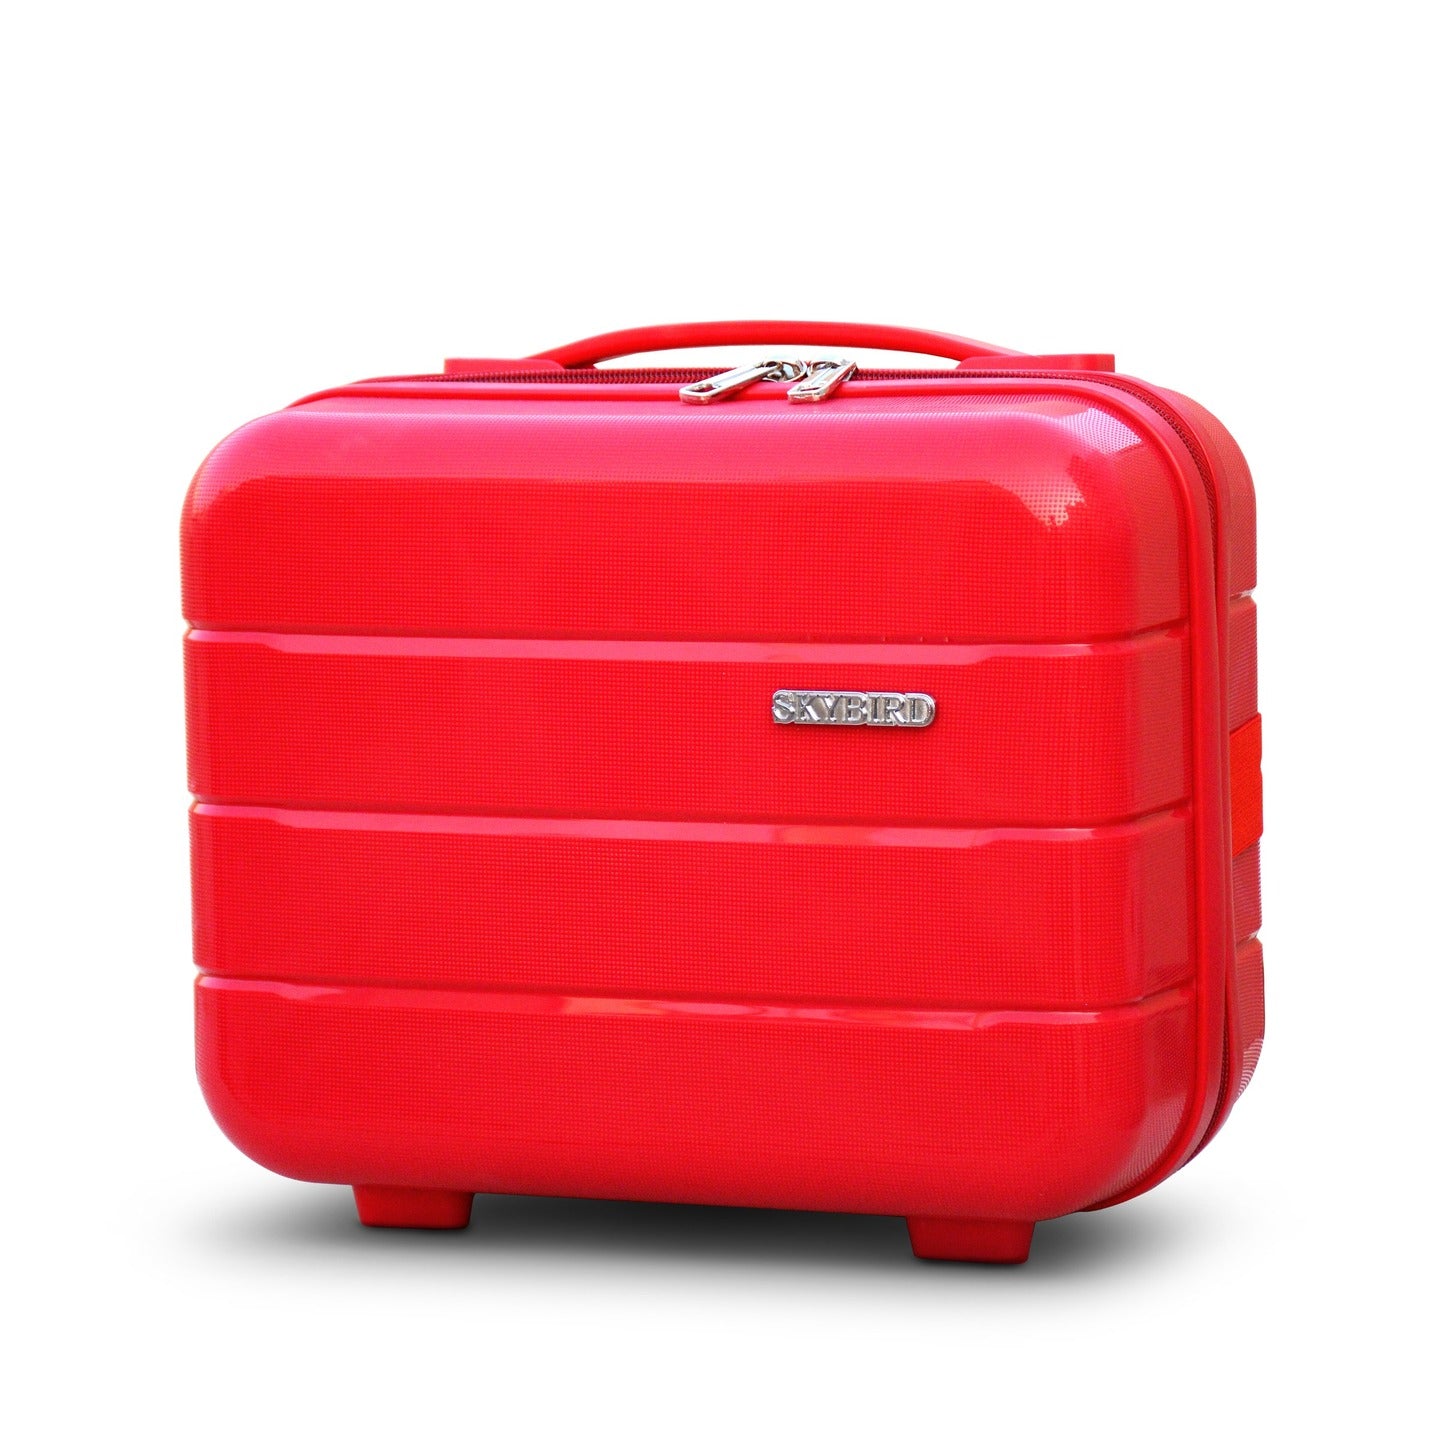 4 Piece Set 7" 20" 24" 28 Inches Red Ceramic Smooth PP Lightweight Luggage Bag with Double Spinner Wheels